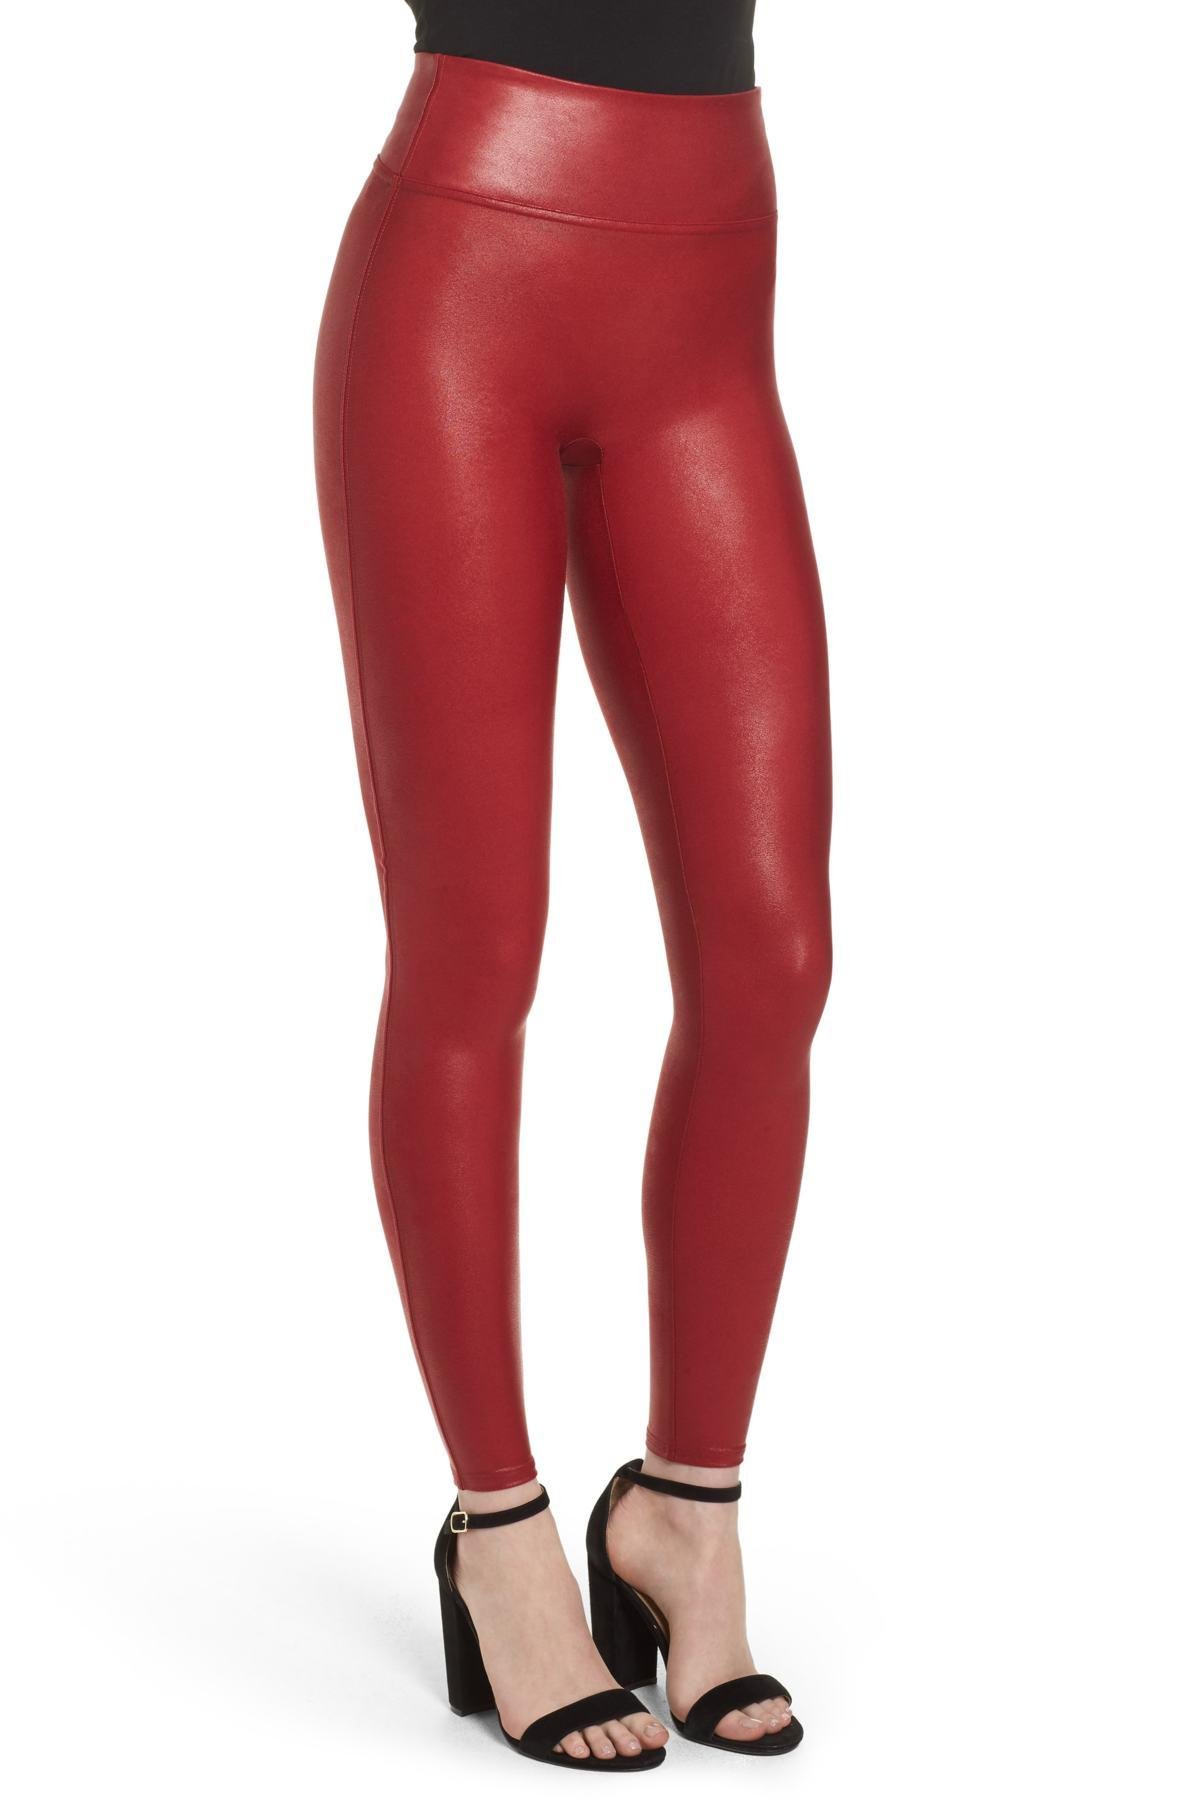 Women's Red Leather & Faux Leather Pants & Leggings